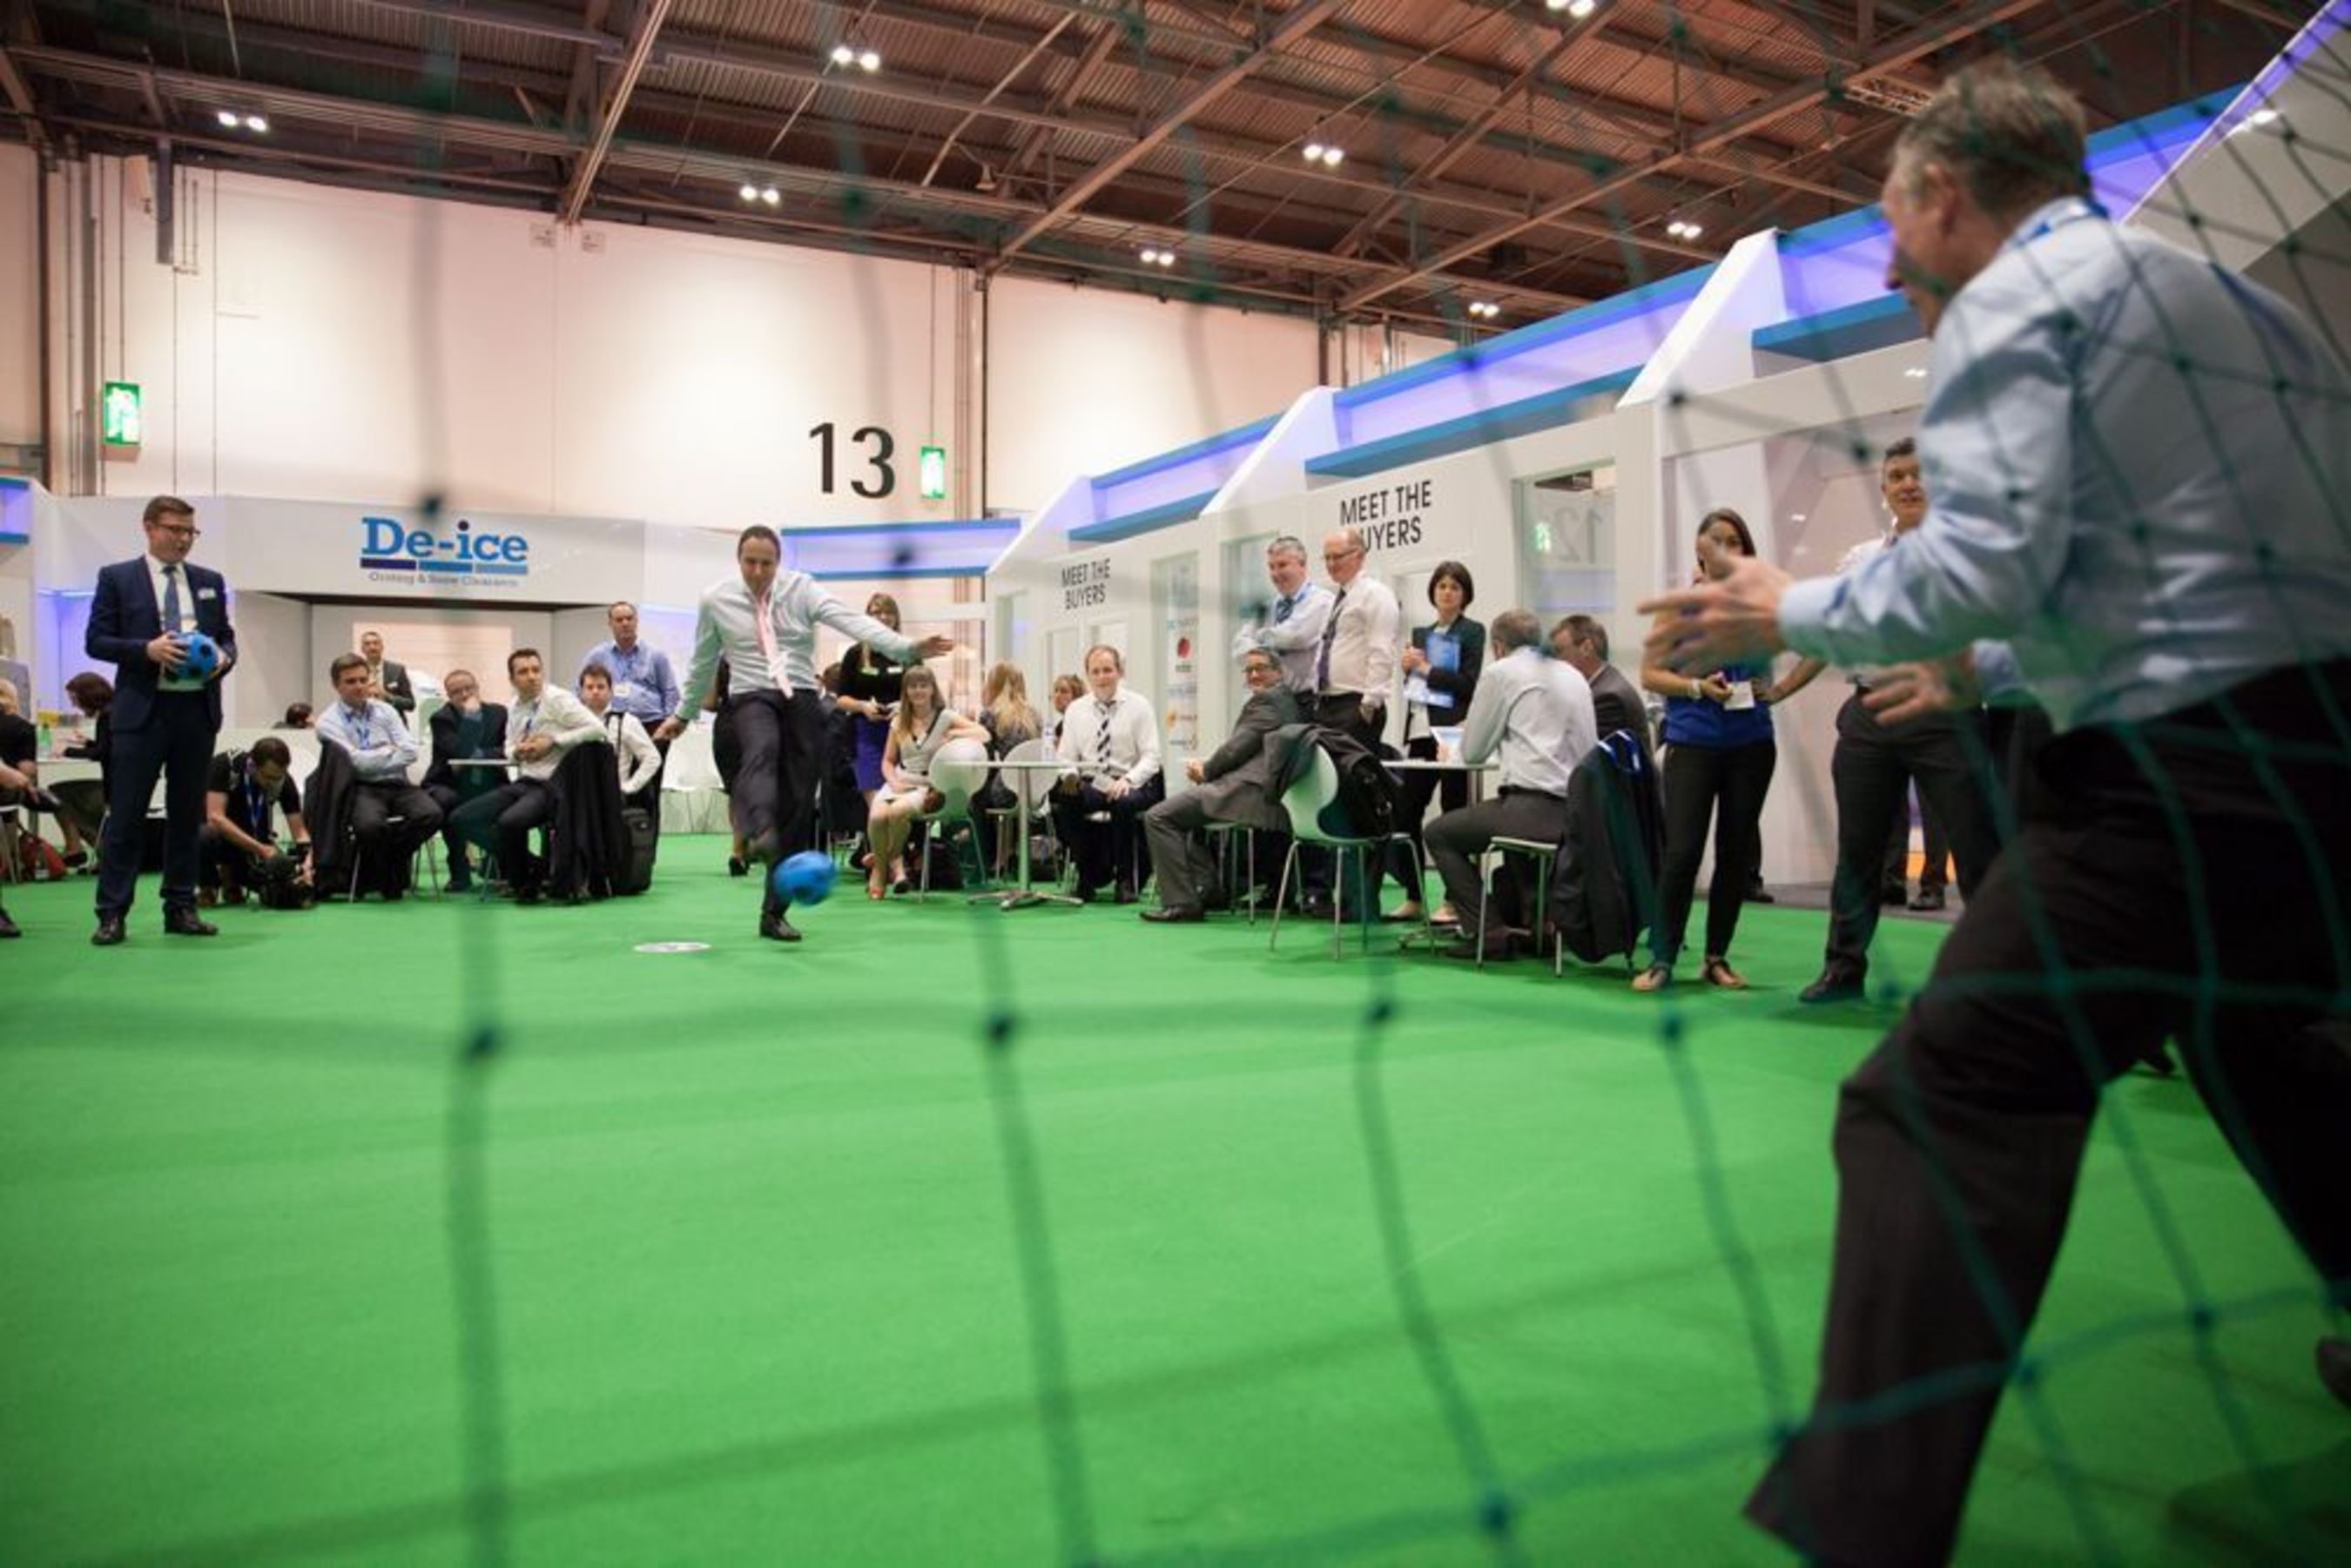 The De-ice Arena at Facilities Show was a hub of networking during the 3 days of the exhibition in June 2014. (PRNewsFoto/UBM Live)